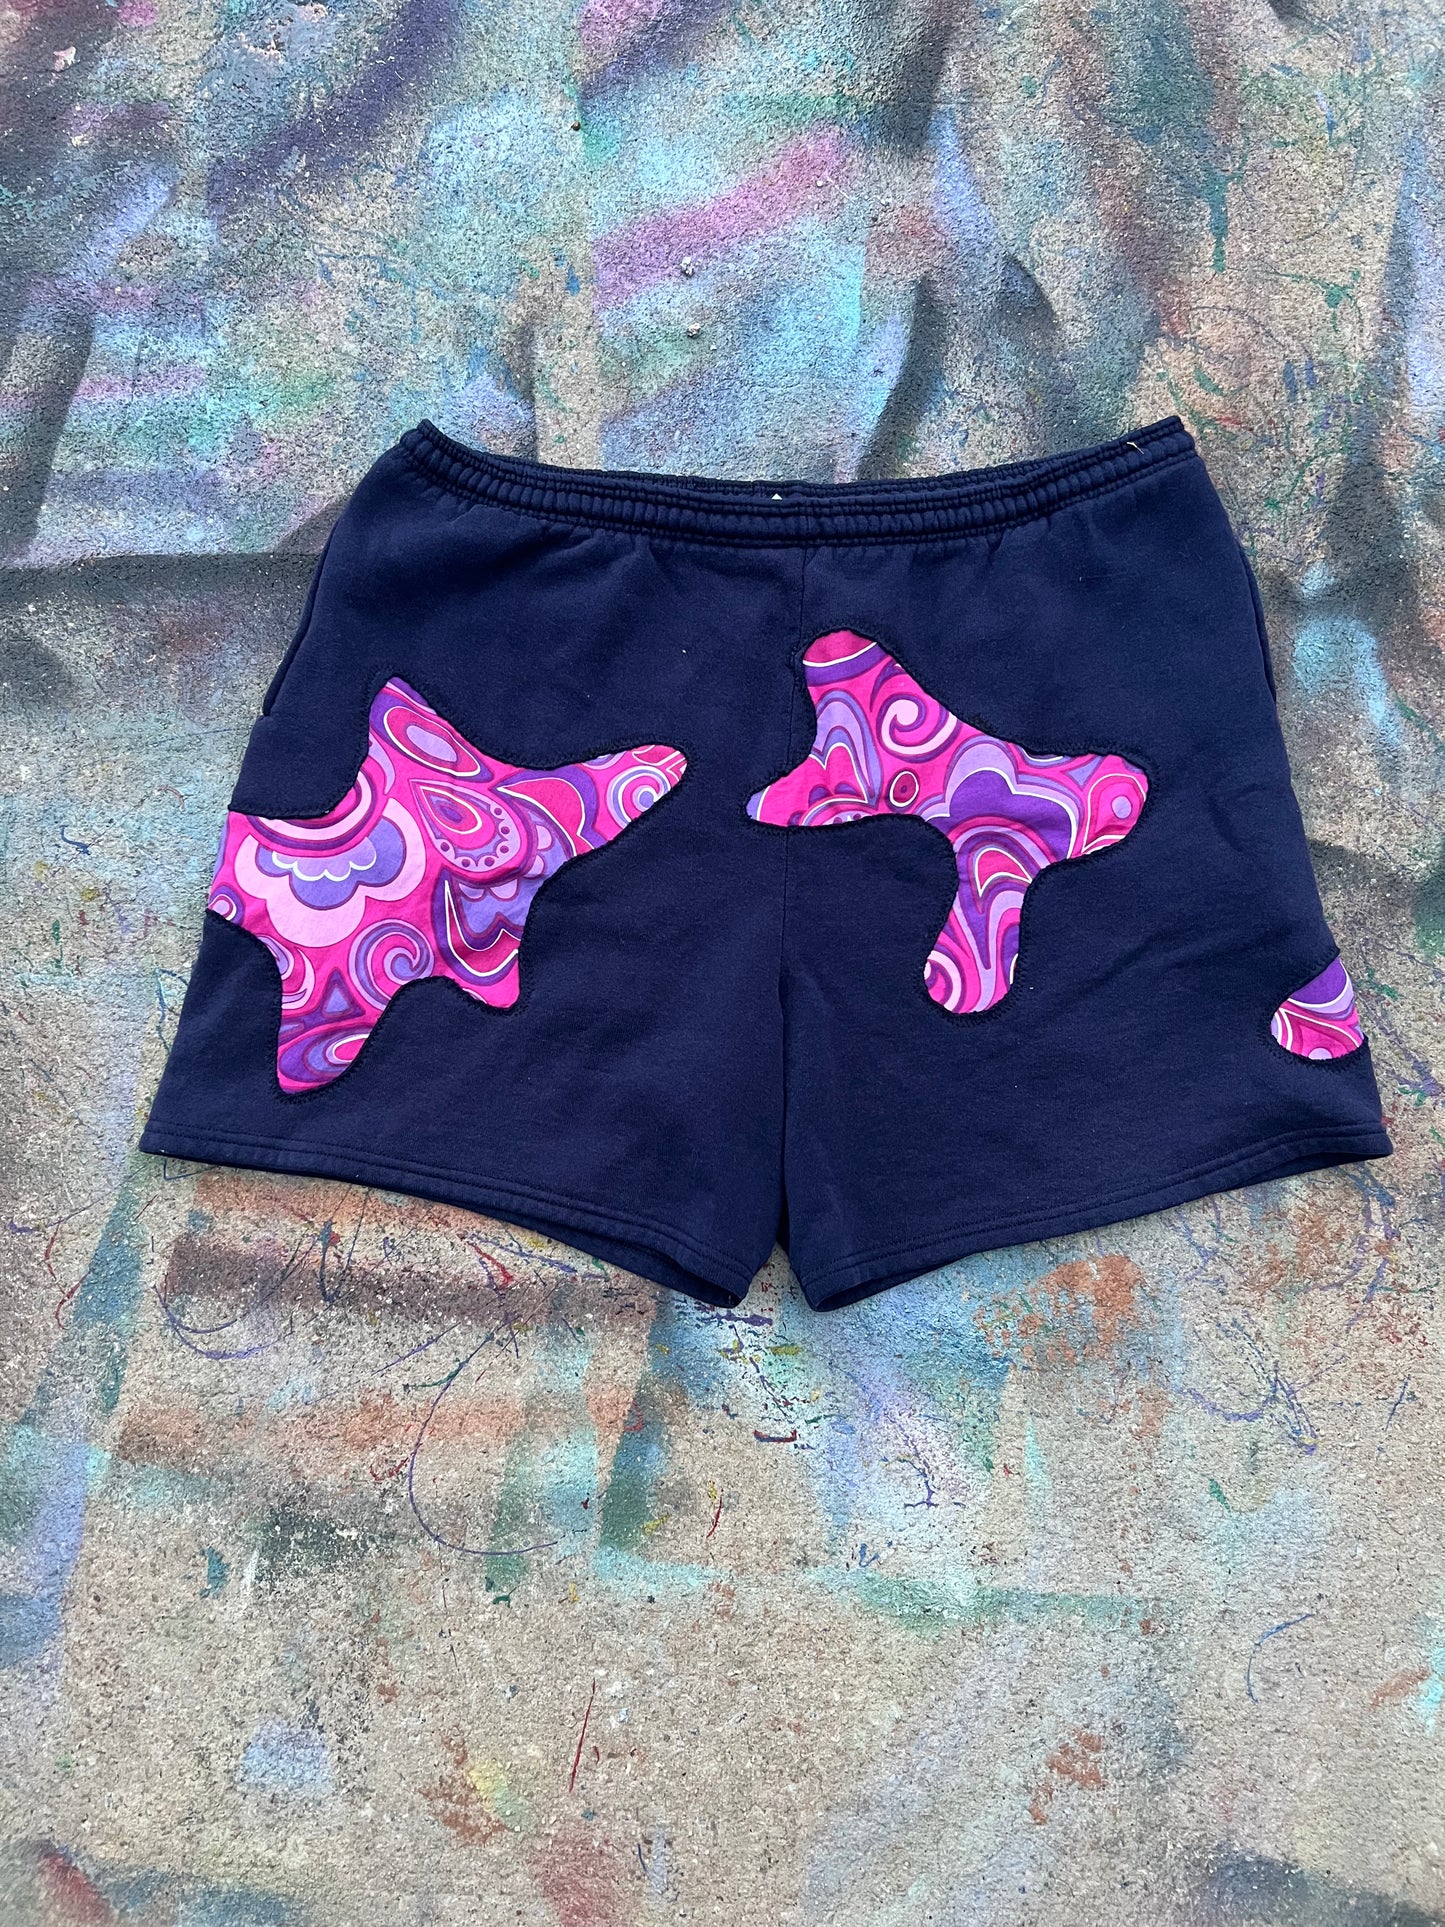 (LS) Scab Patches Shorts (Pink/Purple/Navy) - XL